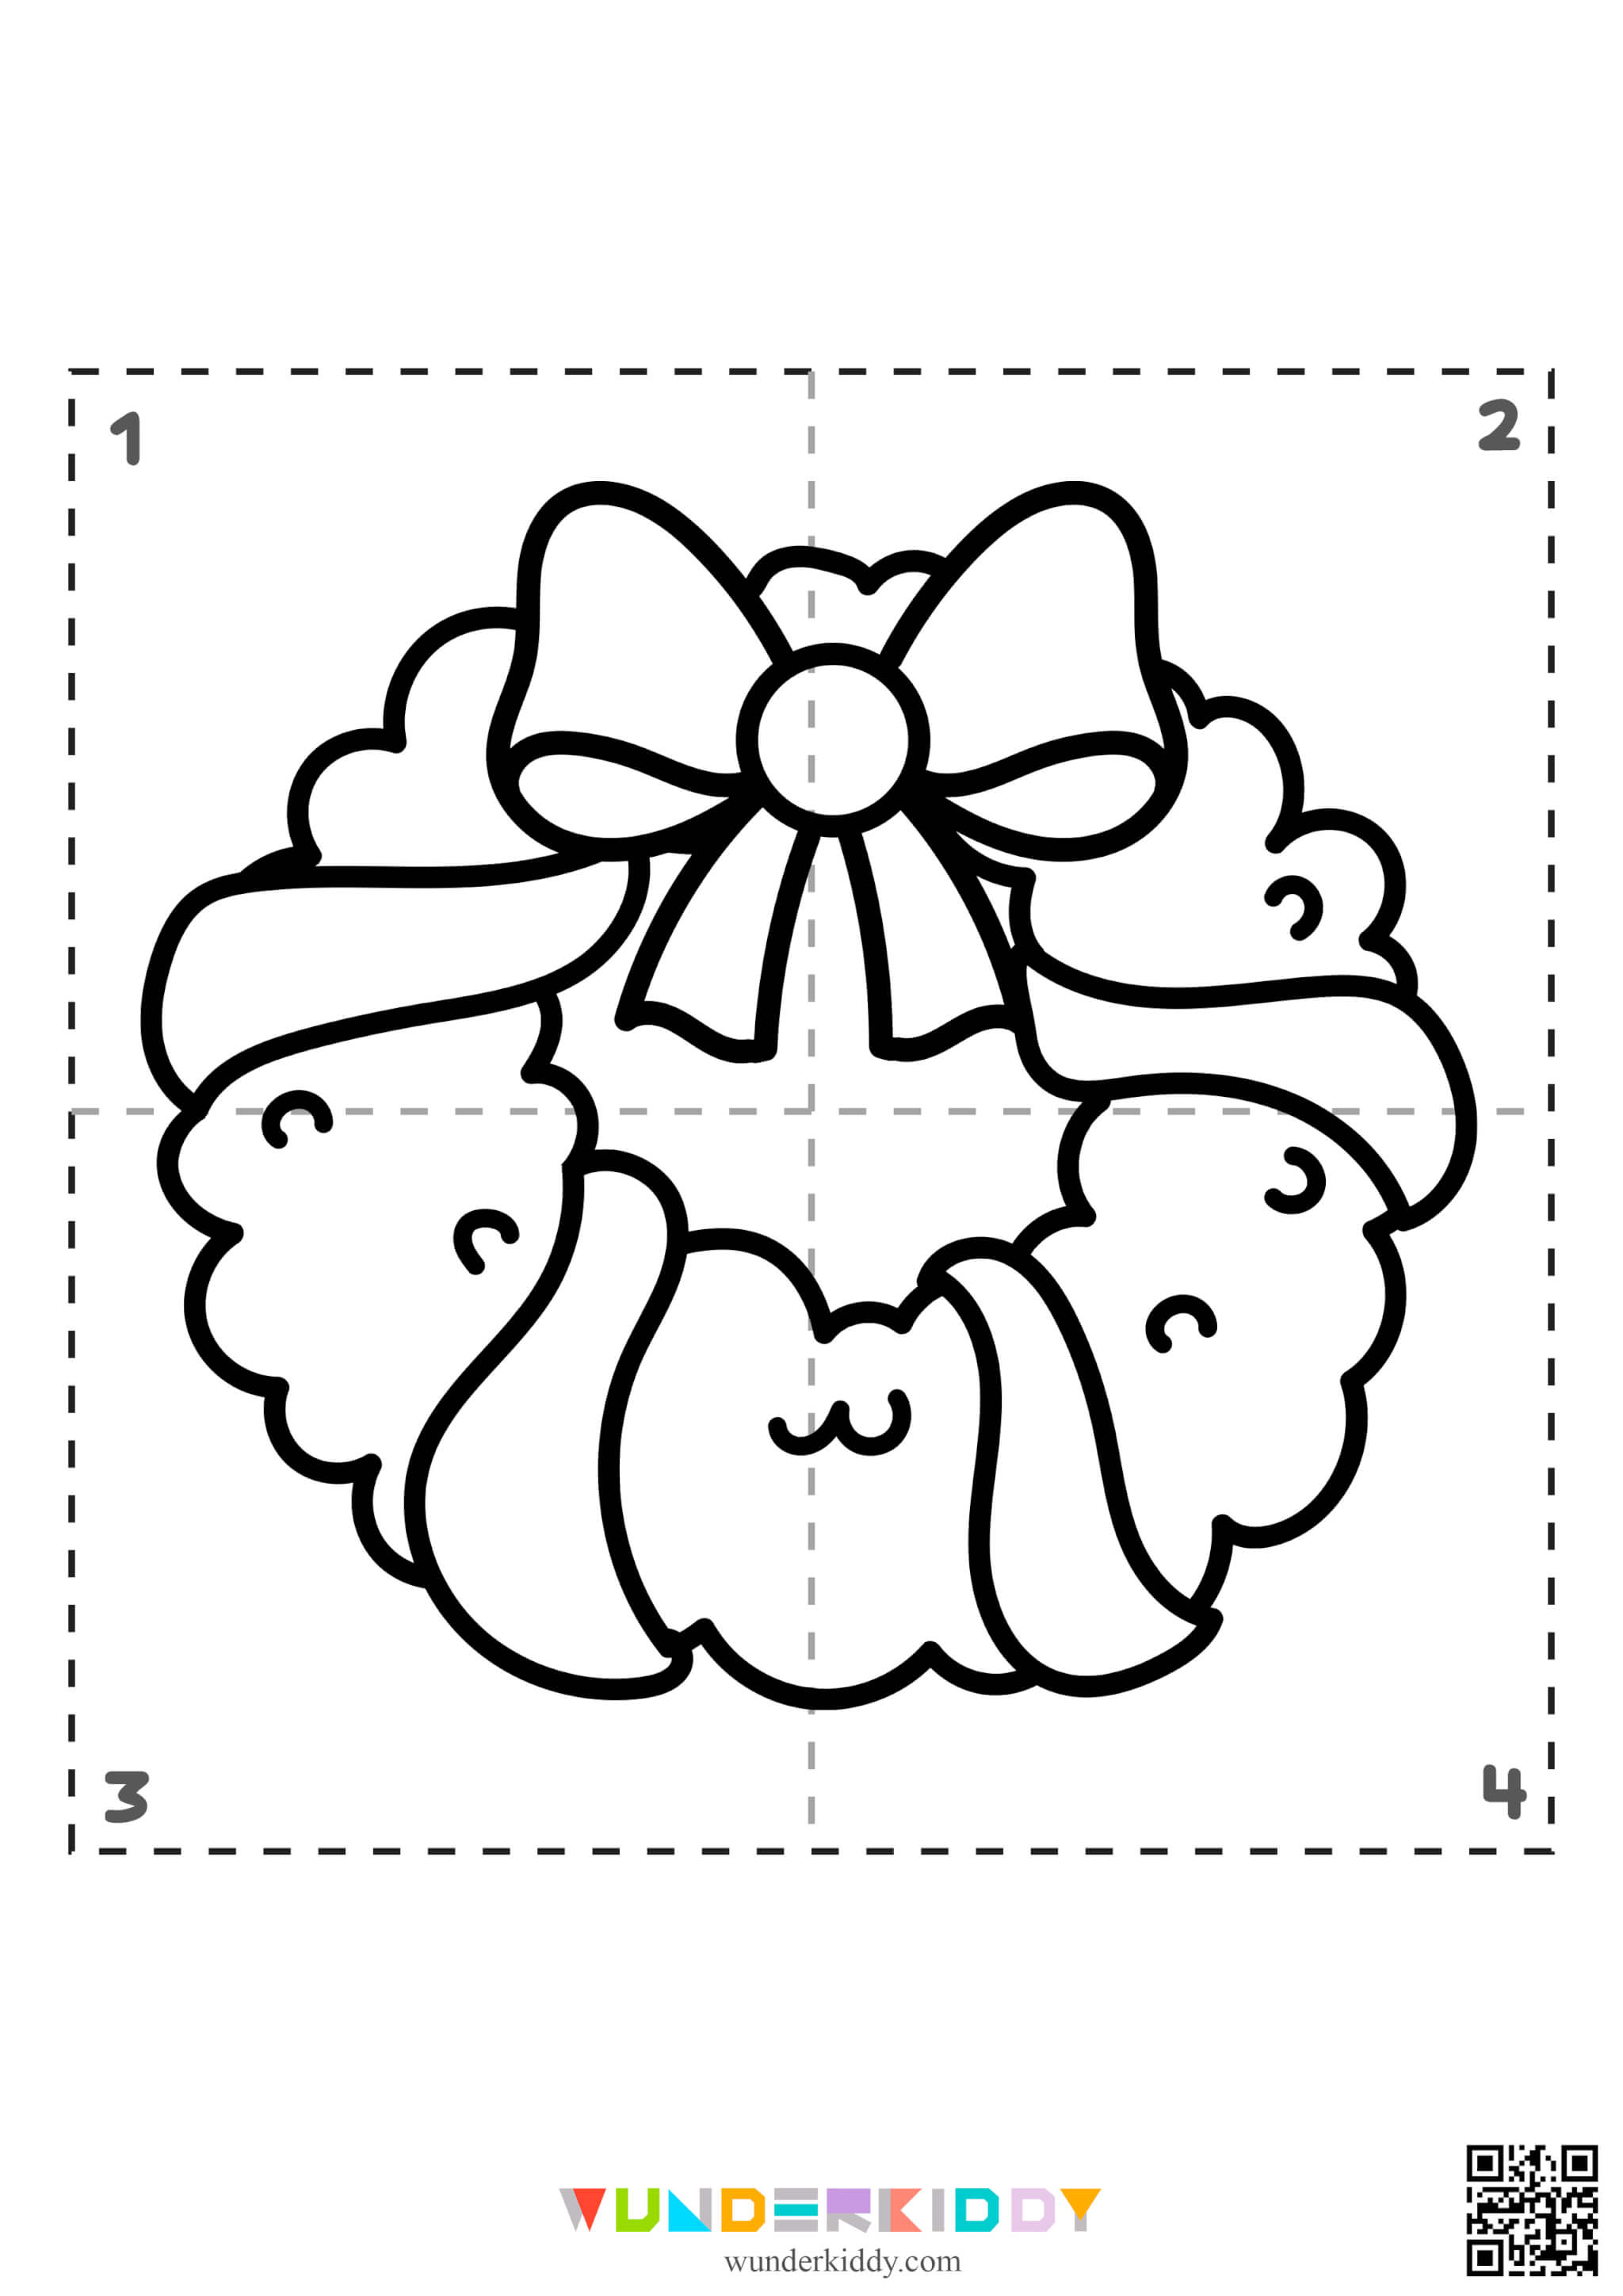 Coloring pages for preschoolers of all ages new years puzzle